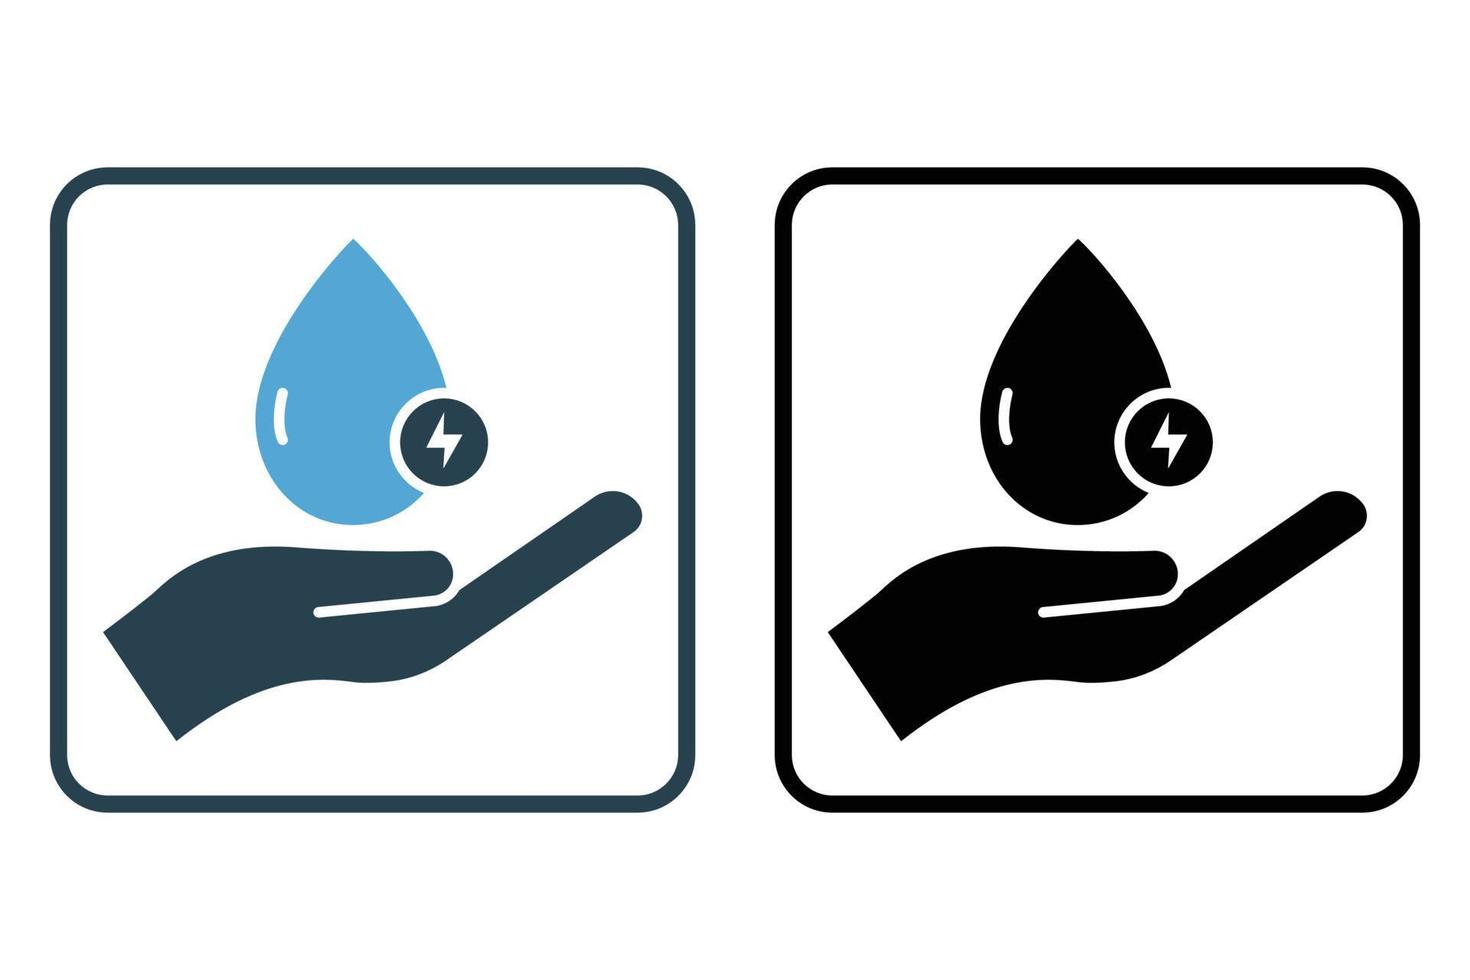 Safe hydro power icon illustration. Hand icon with water drop and electricity. icon related to ecology, renewable energy. Solid icon style. Simple vector design editable